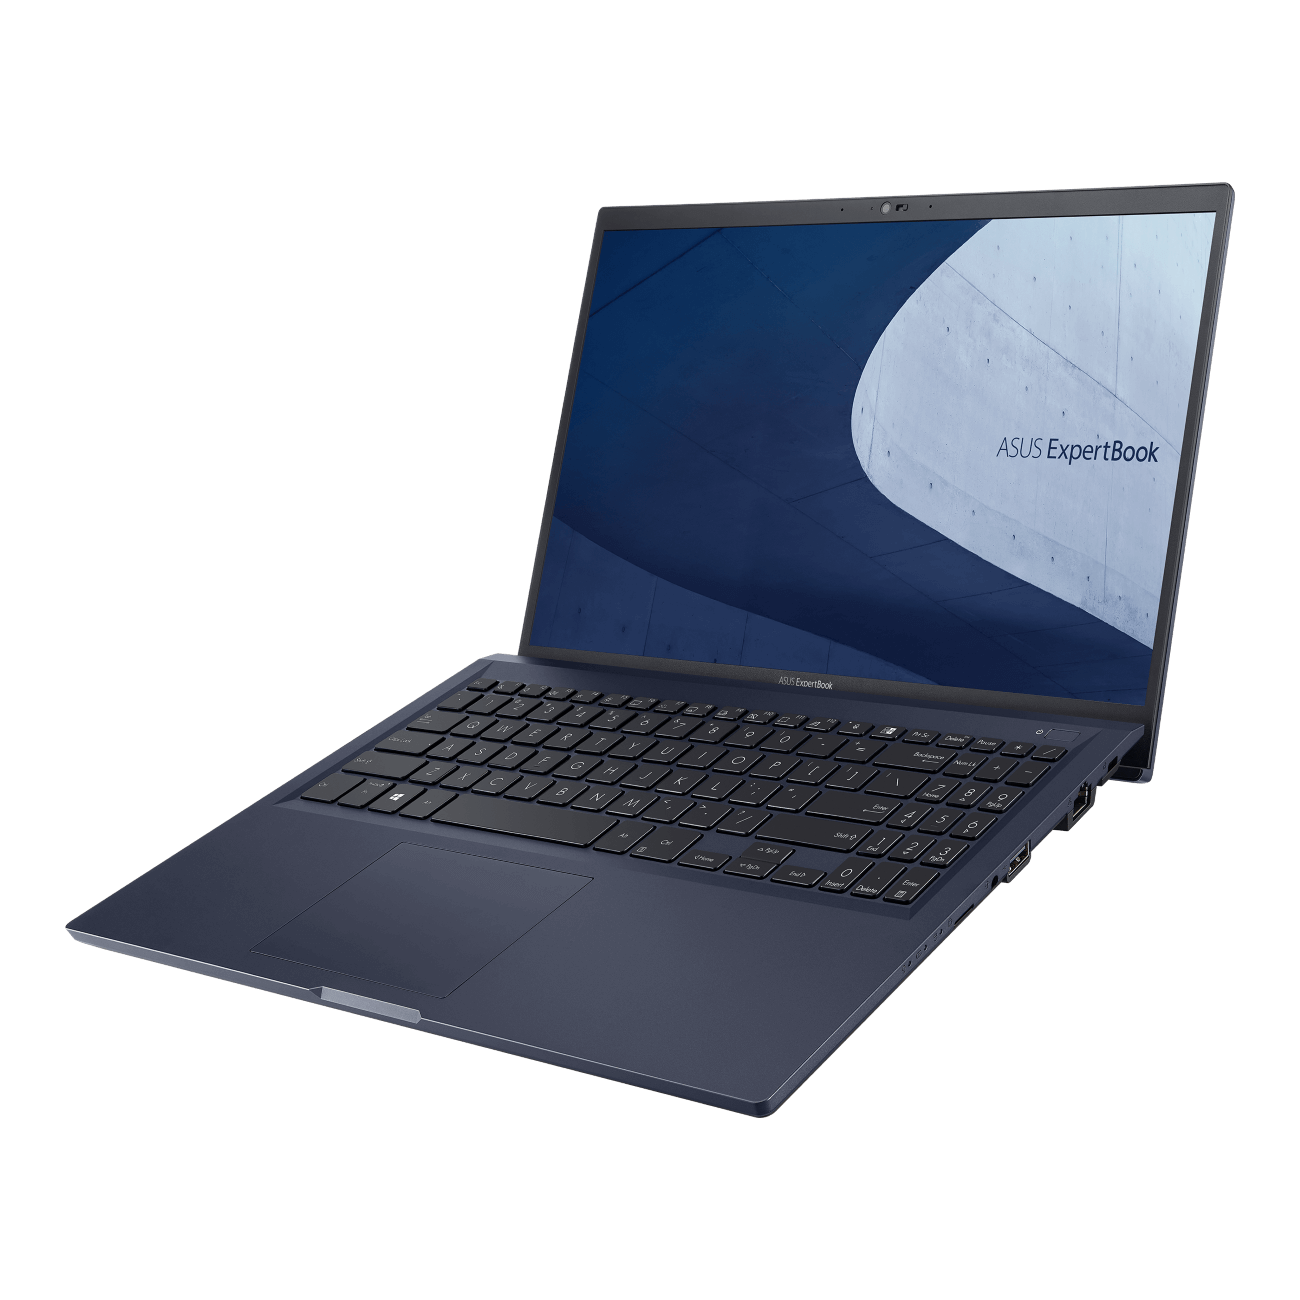 Notebook ASUS Expertbook B1500CEAE-BQ0666R 15.6"FHD LED Core i7-1165G7 2.8/4.7GHz 8GB DDR4